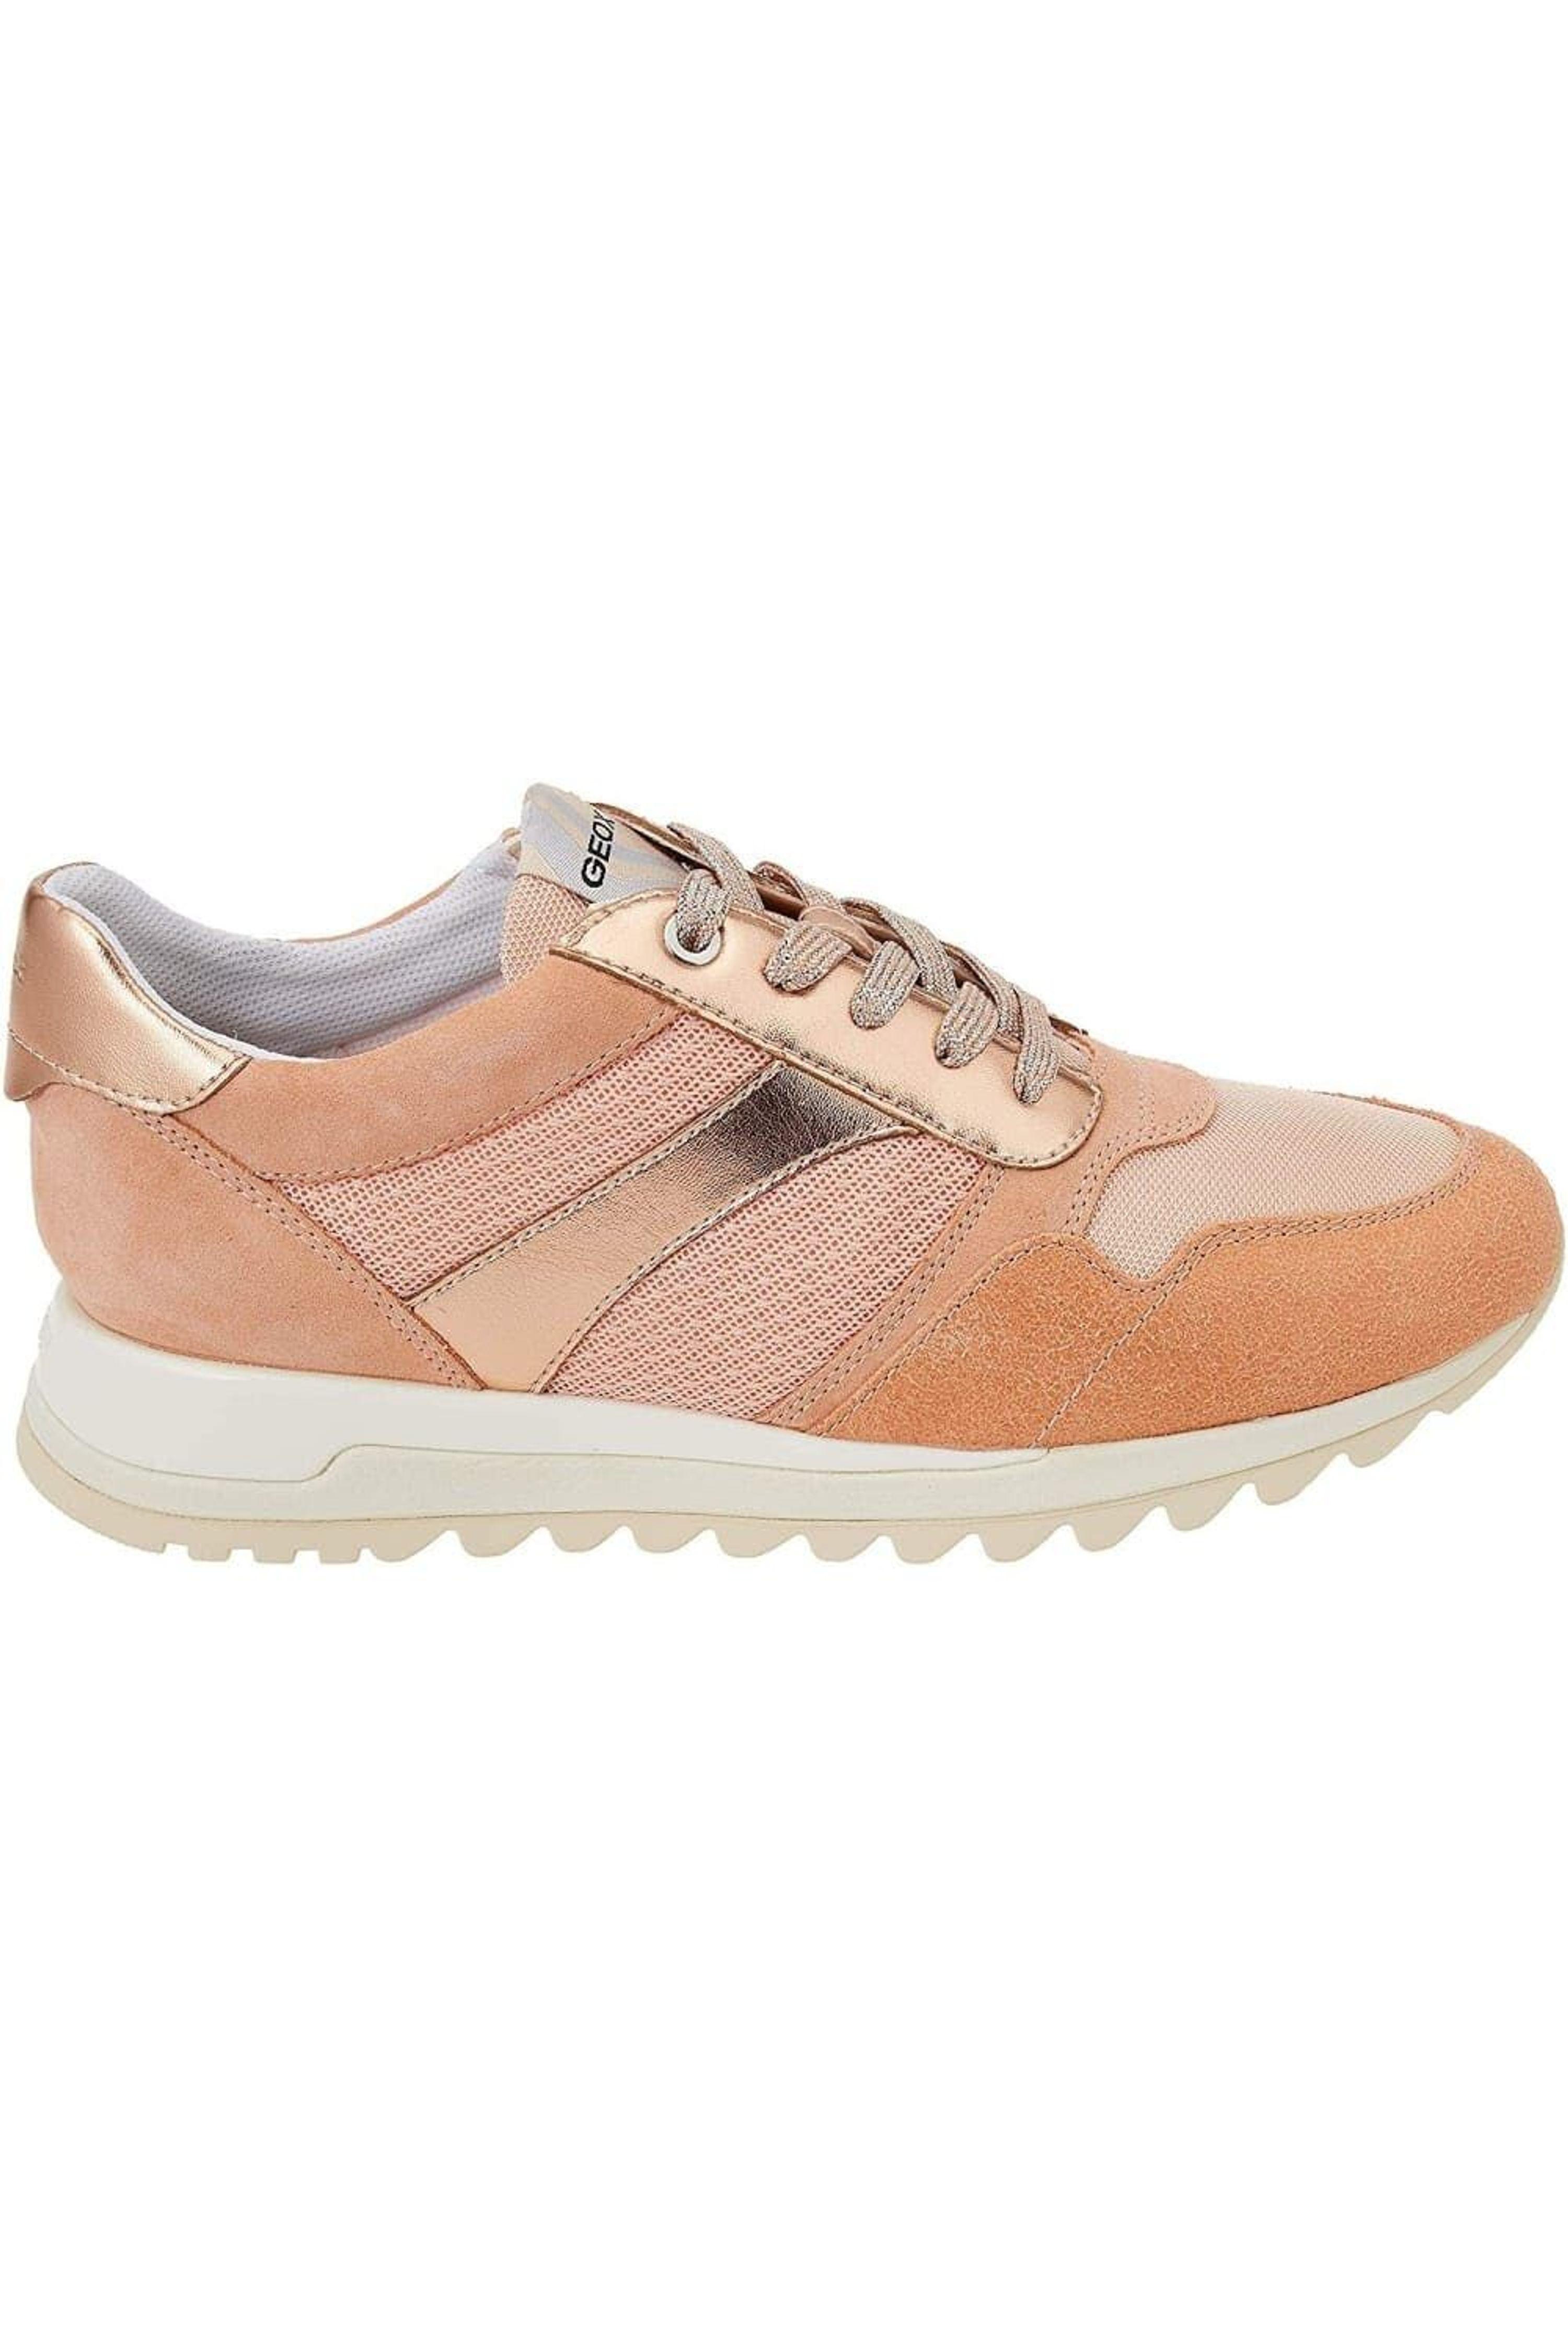 Geox Tabelya Leather Sneakers in Natural | Lyst